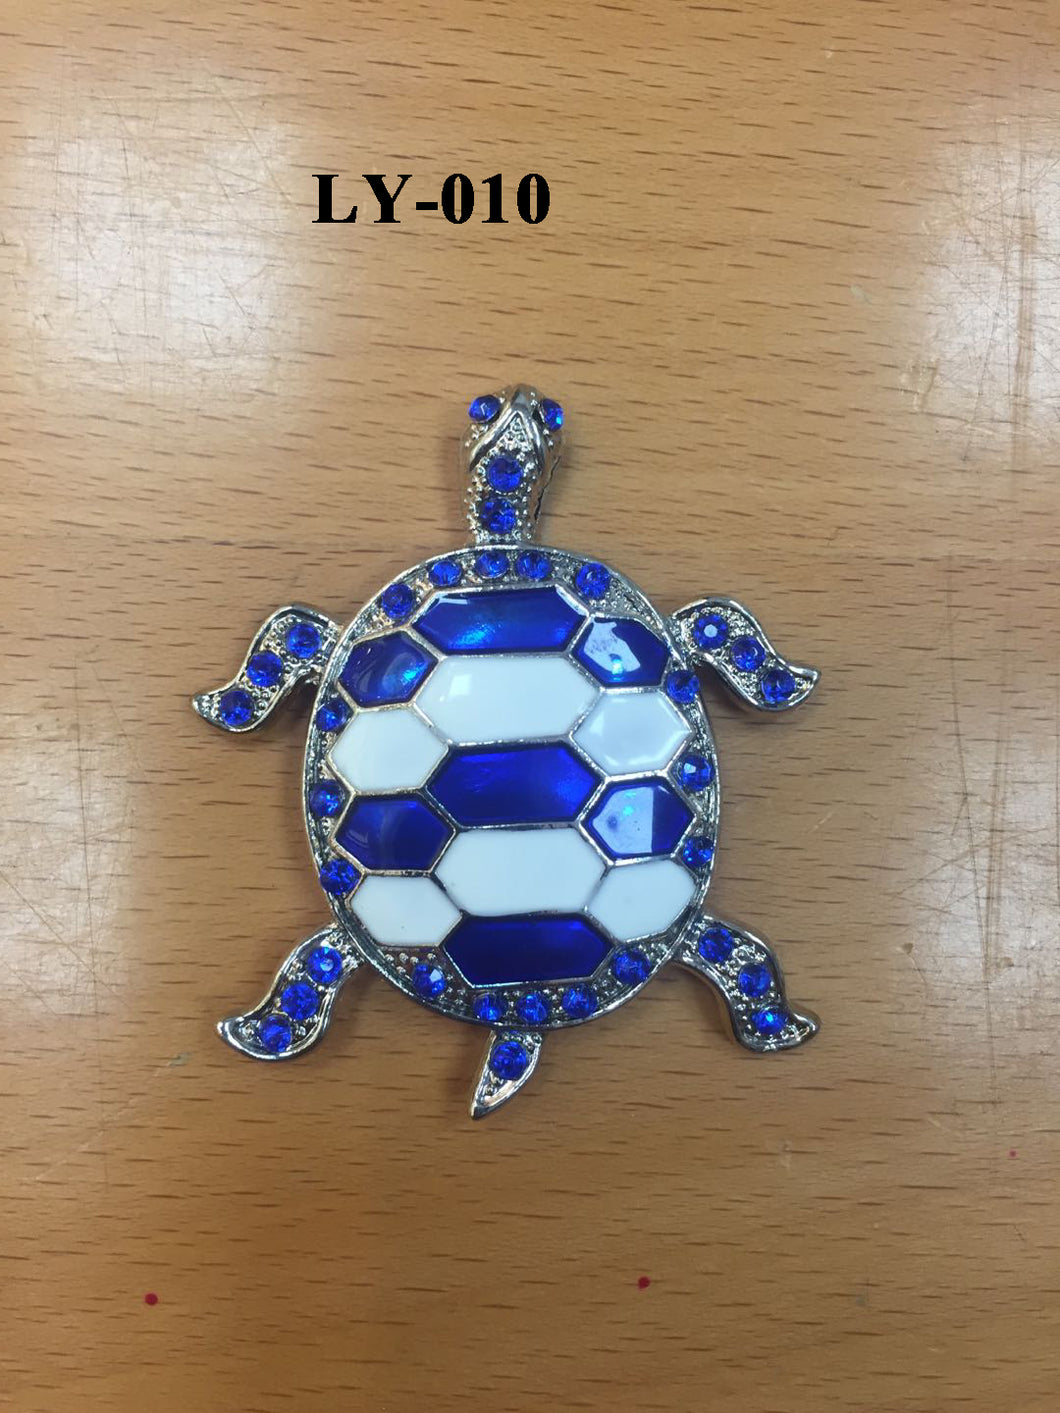 Evileye Turtle-magnet LY-010